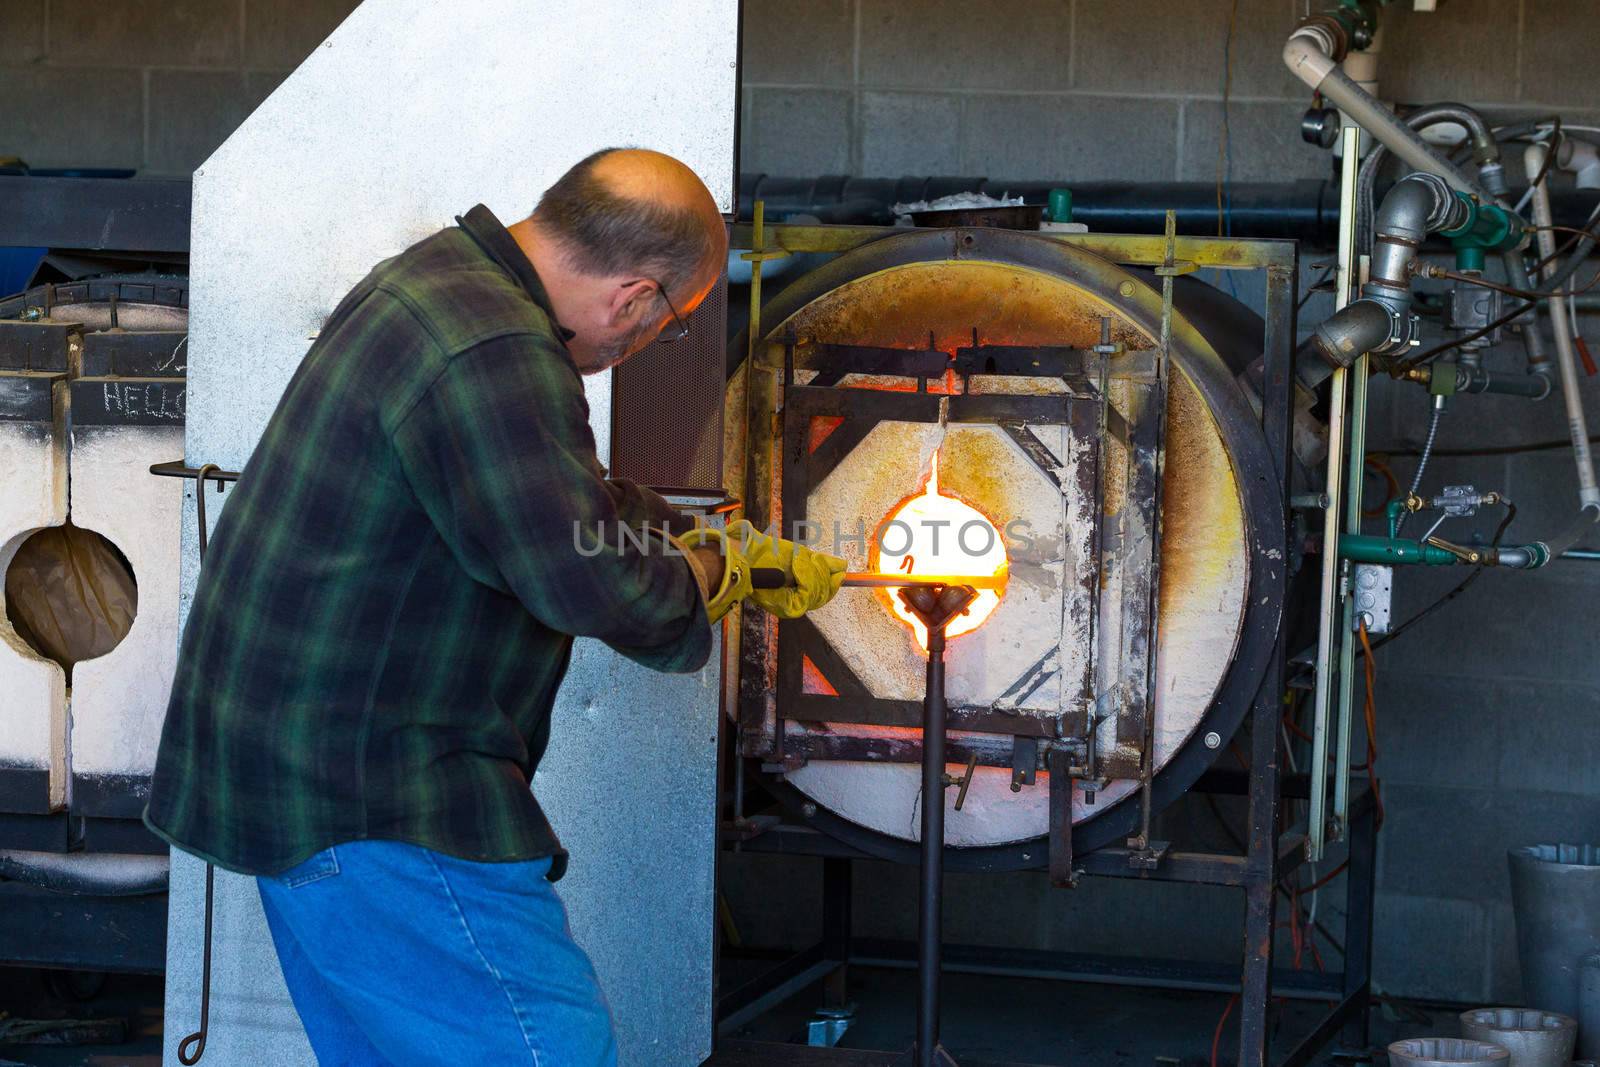 A man fires up his glass while glassblowing using a furnace that is extremely hot.